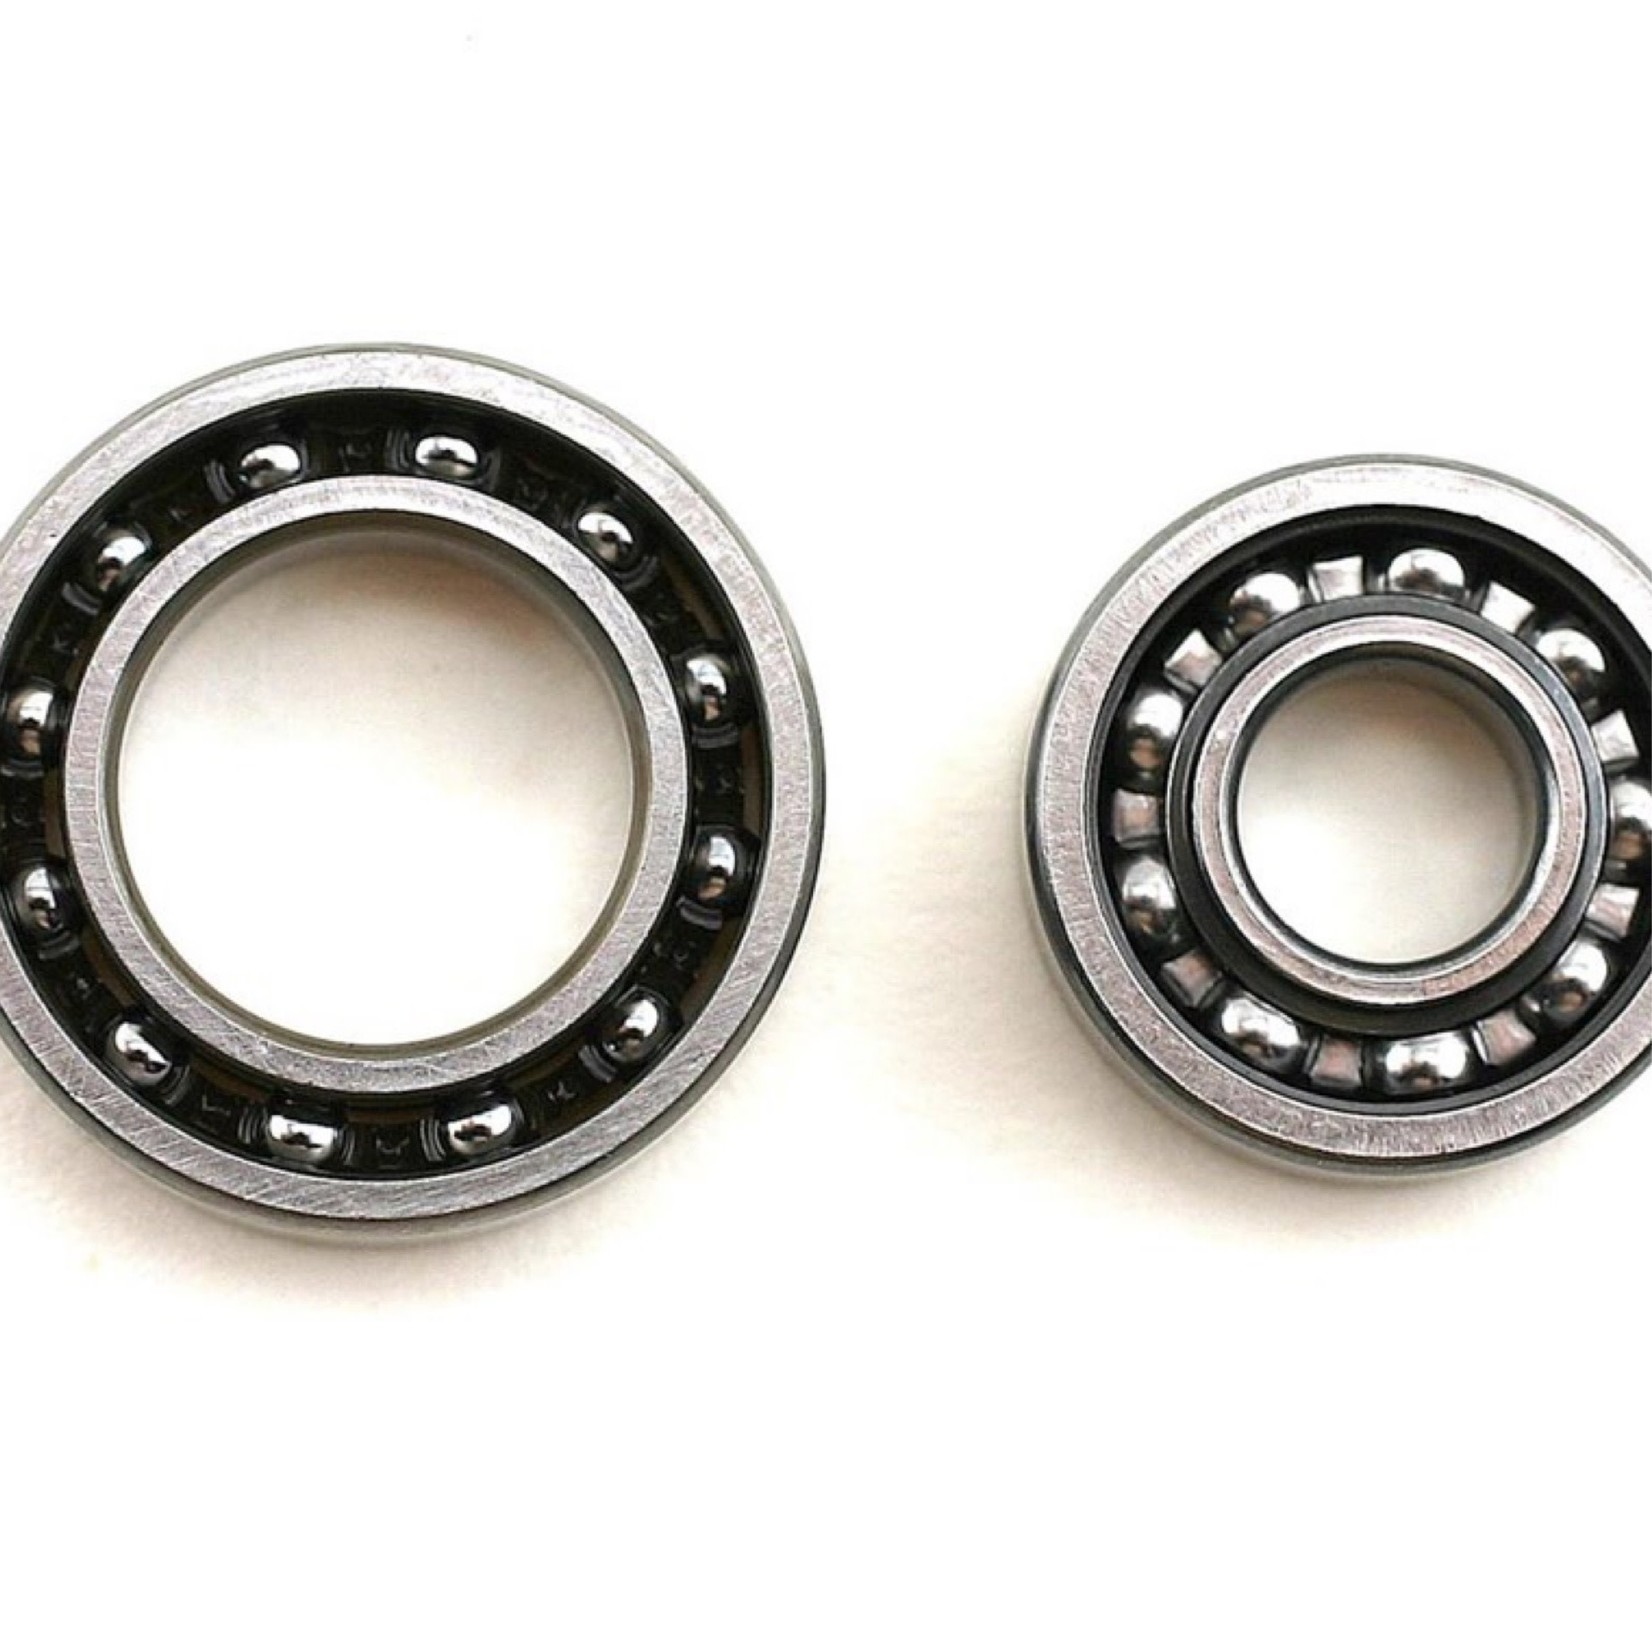 Traxxas Traxxas Front and Rear Engine Ball Bearings (TRX 2.5, 2.5R and 3.3)  #5223